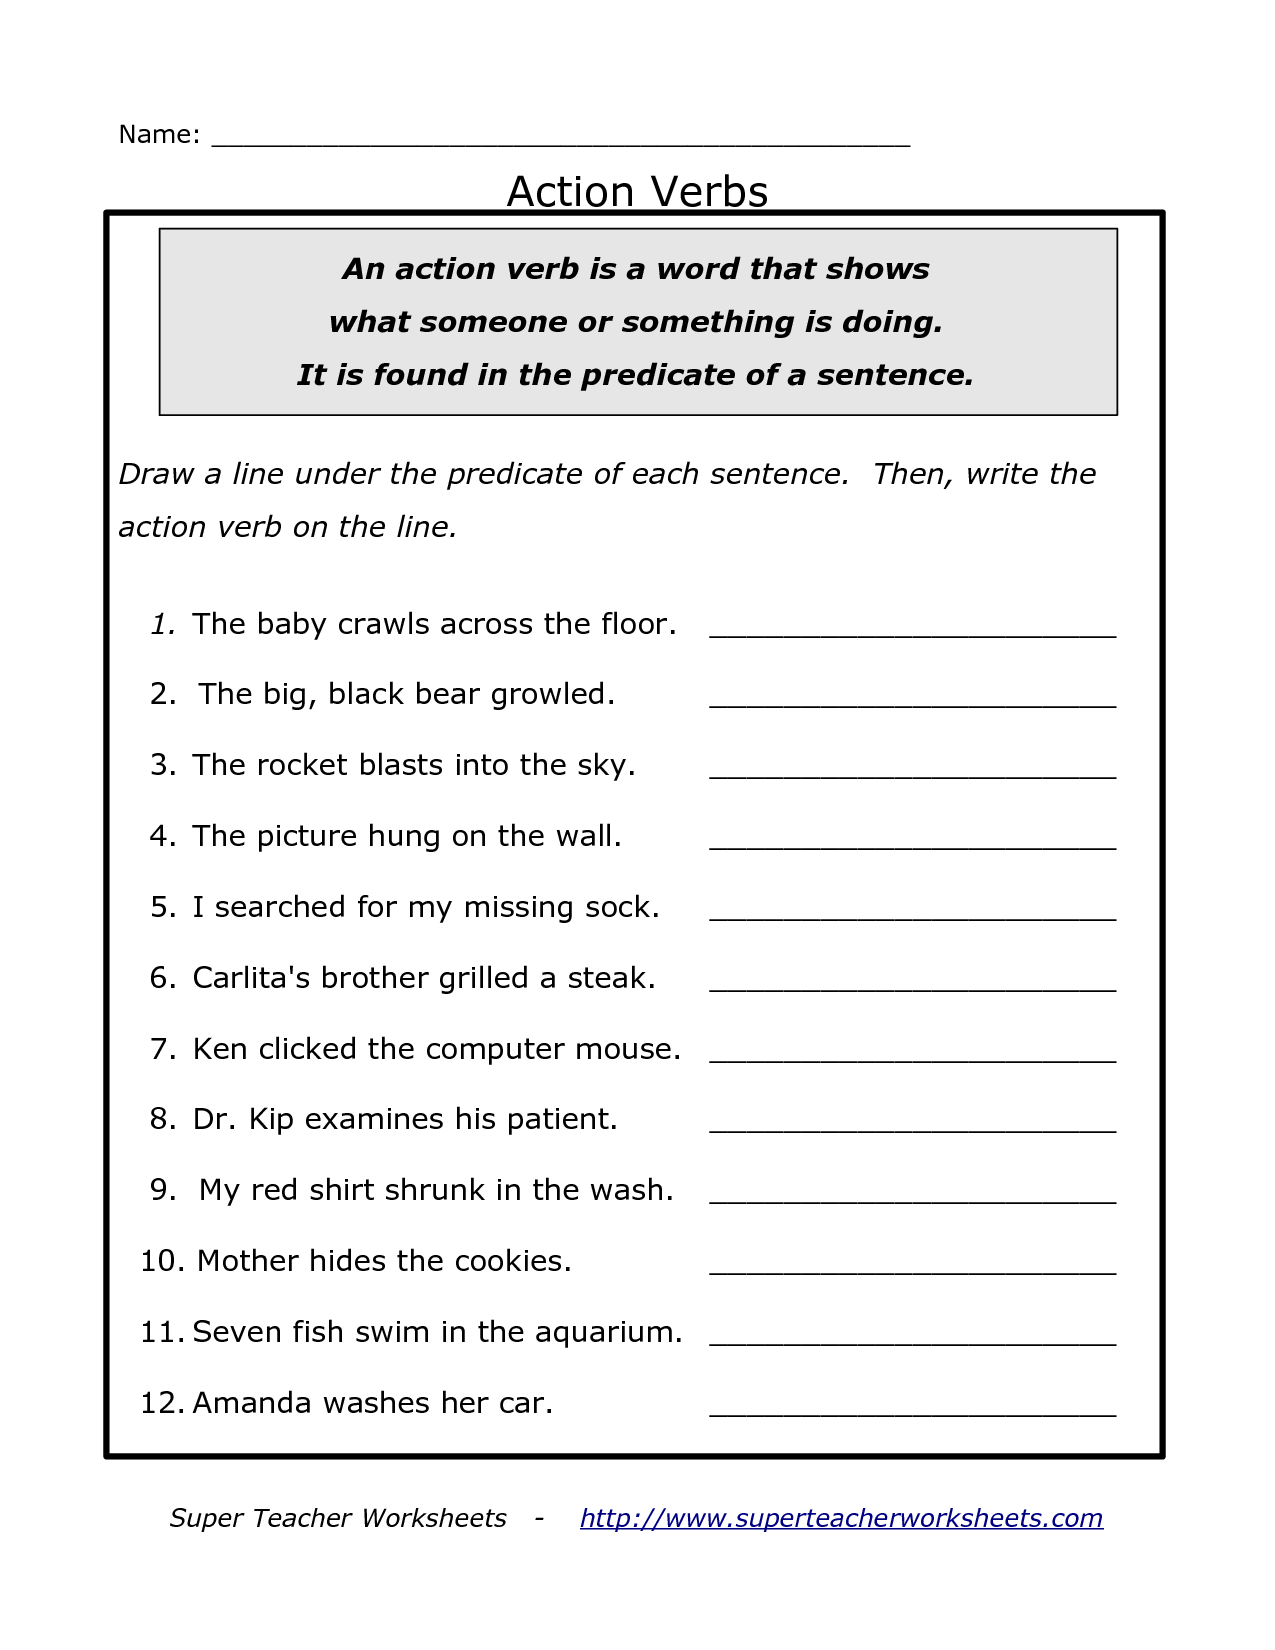 verb-to-be-for-advanced-students-worksheet-free-esl-printable-subject-verb-agreement